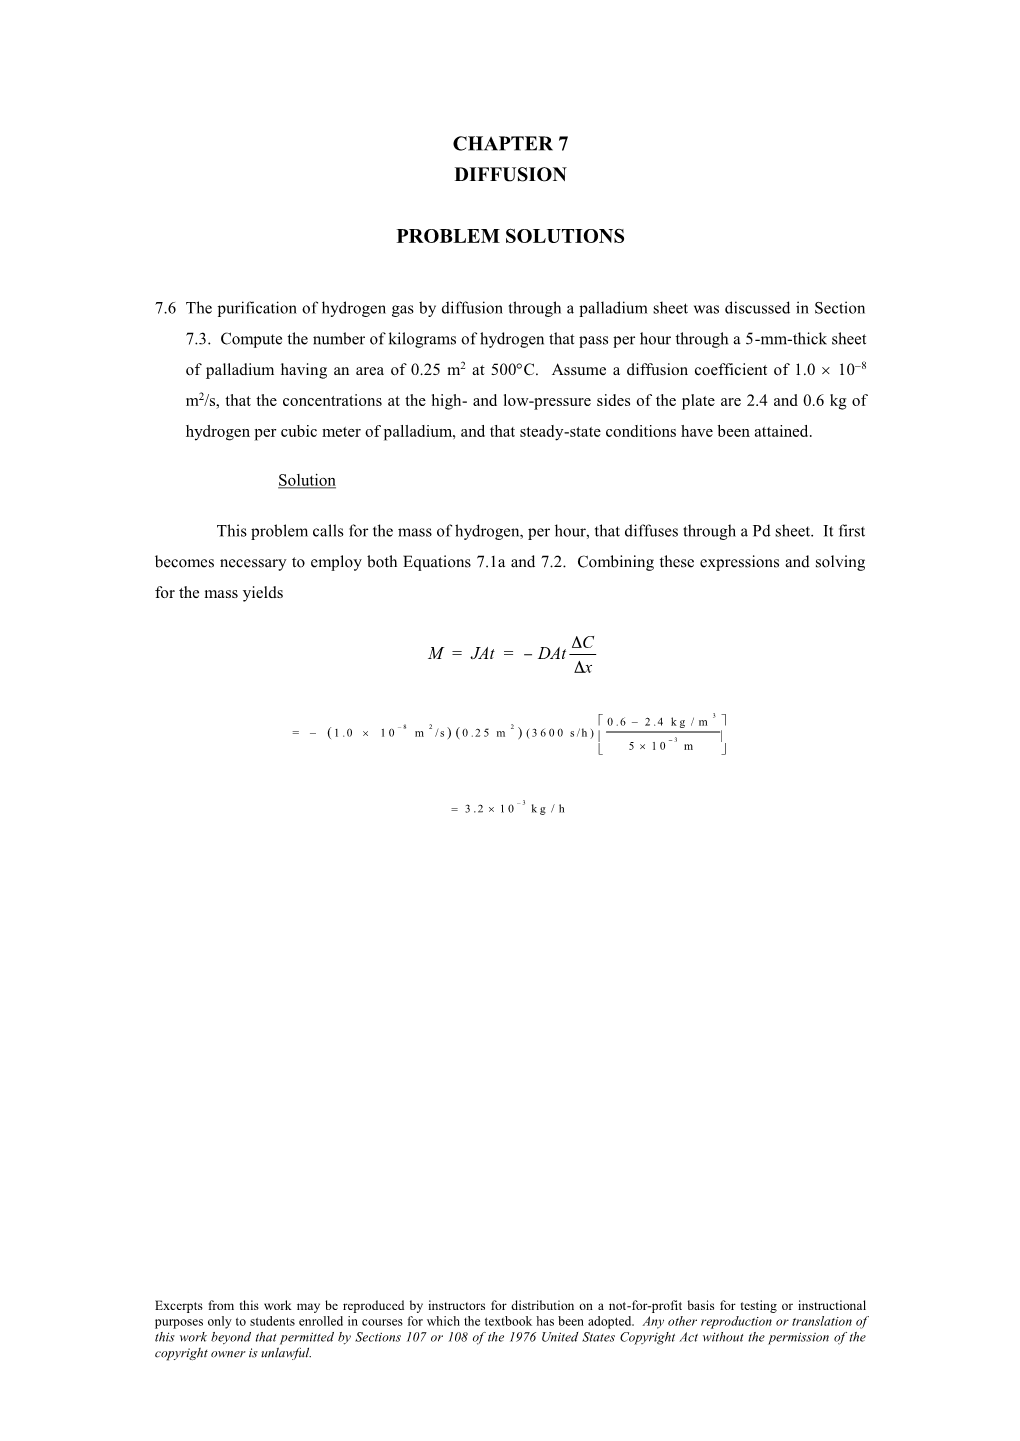 Chapter 7 Diffusion Problem Solutions